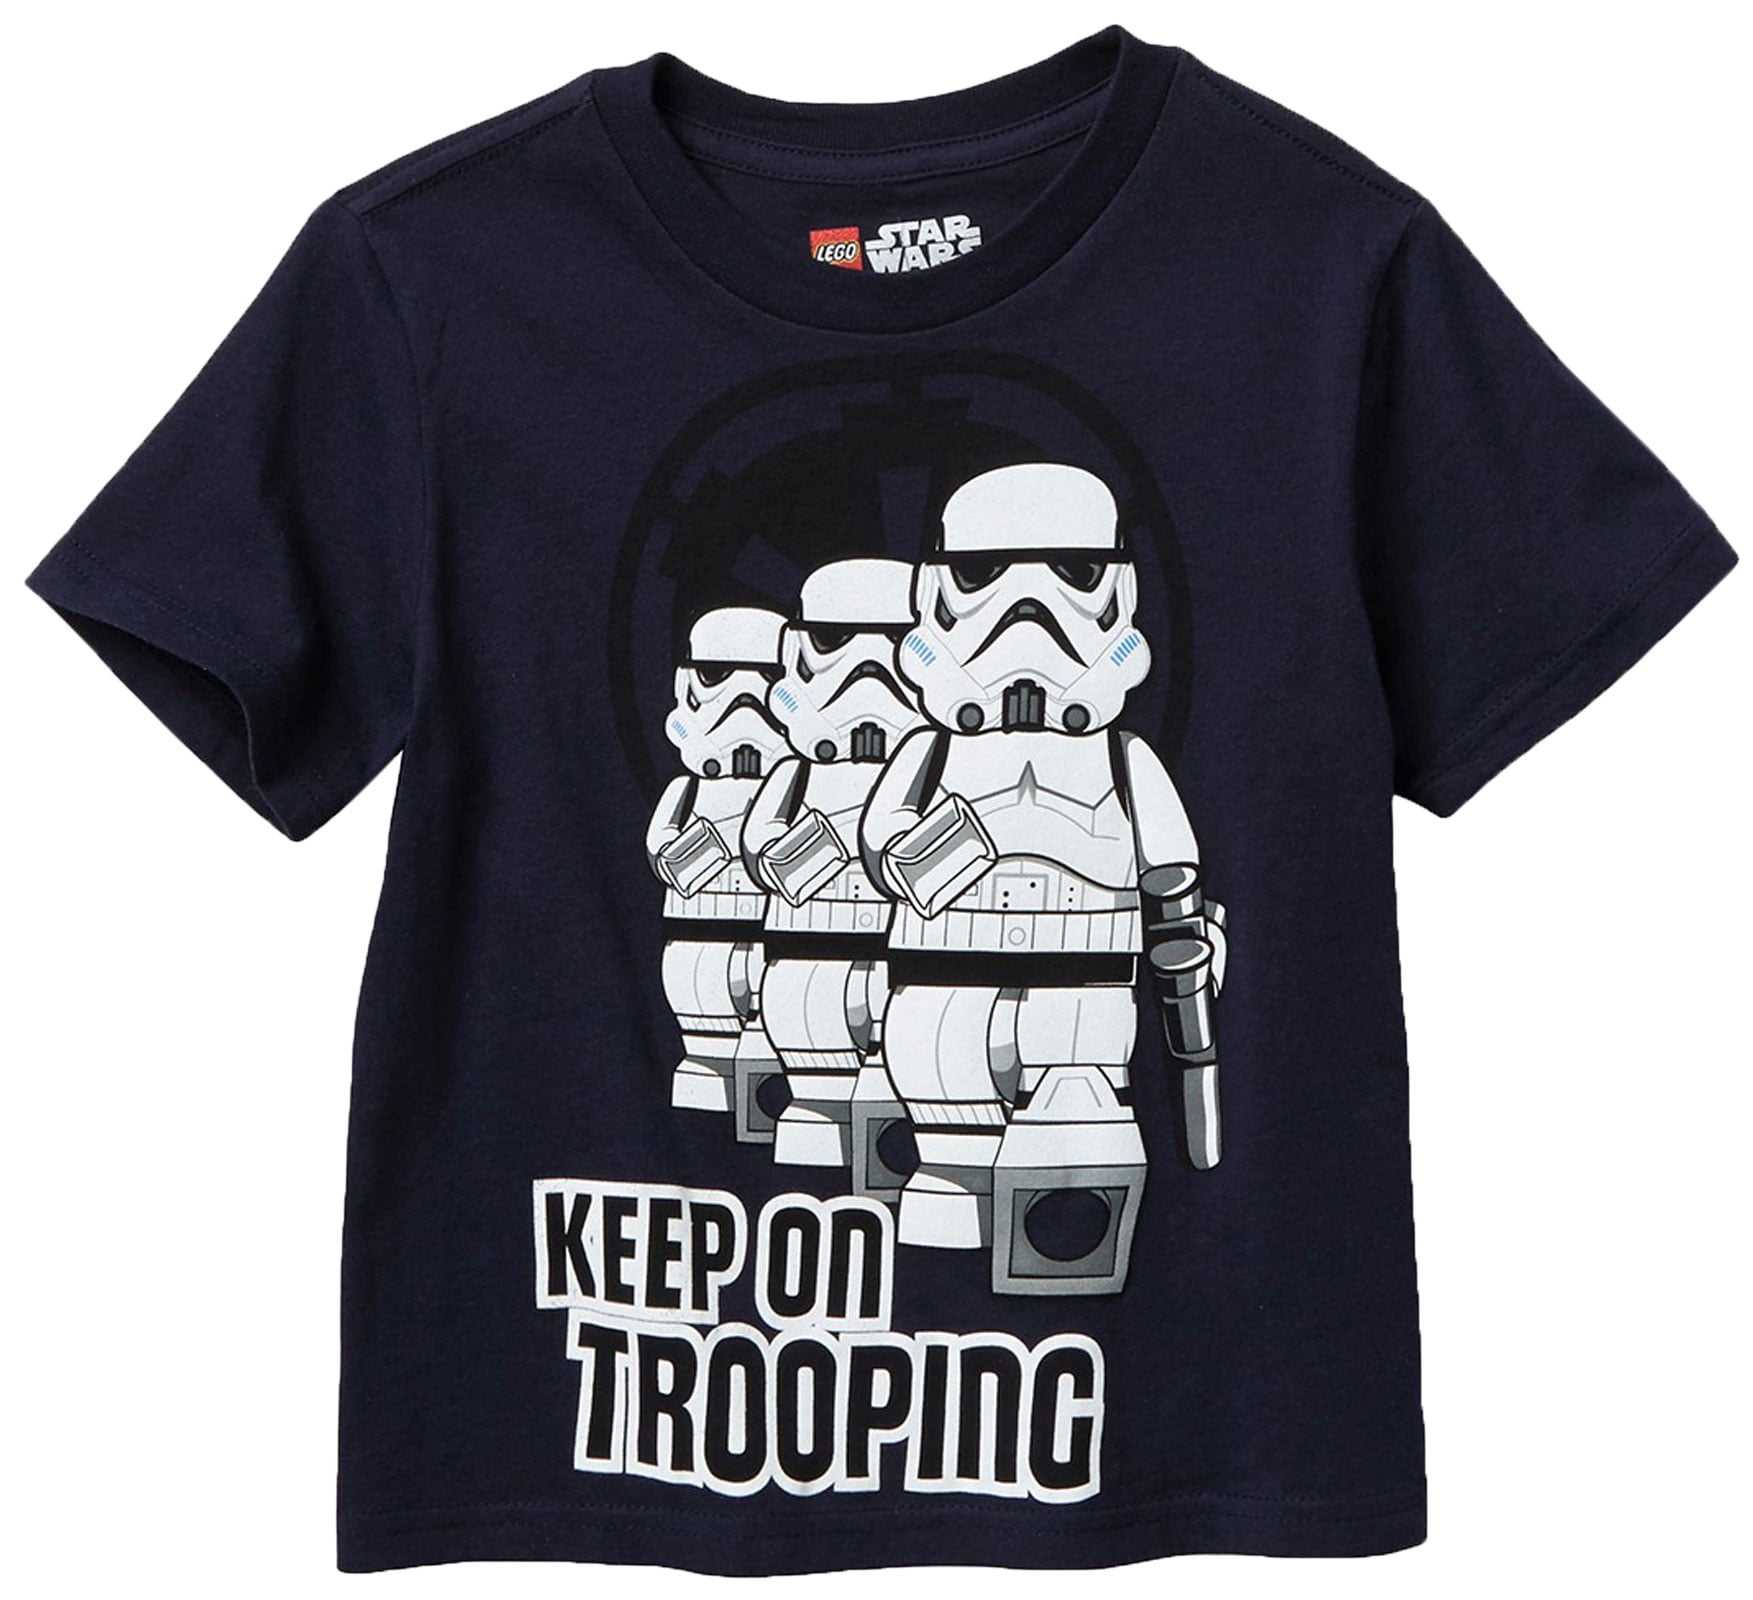 Wars Lego Stormtrooper Keep on Trooping Toddler & Little Boys T-Shirt -